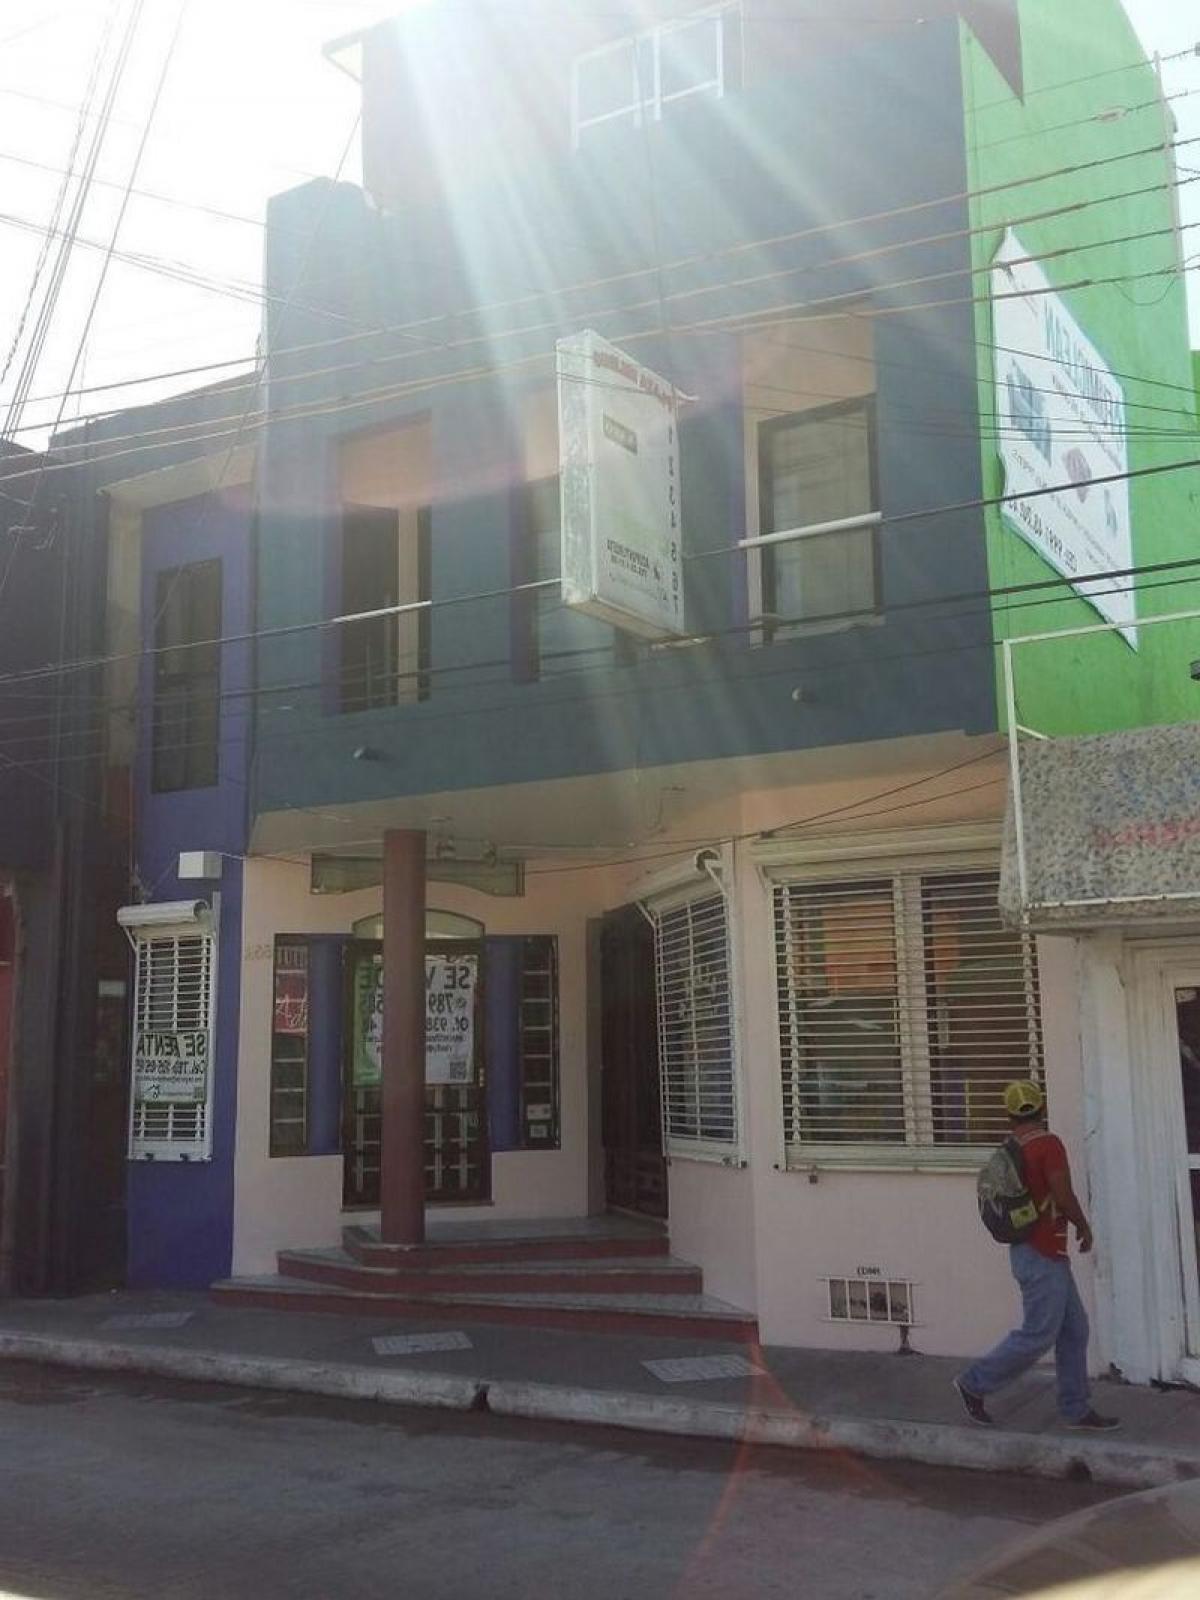 Picture of Apartment Building For Sale in Campeche, Campeche, Mexico